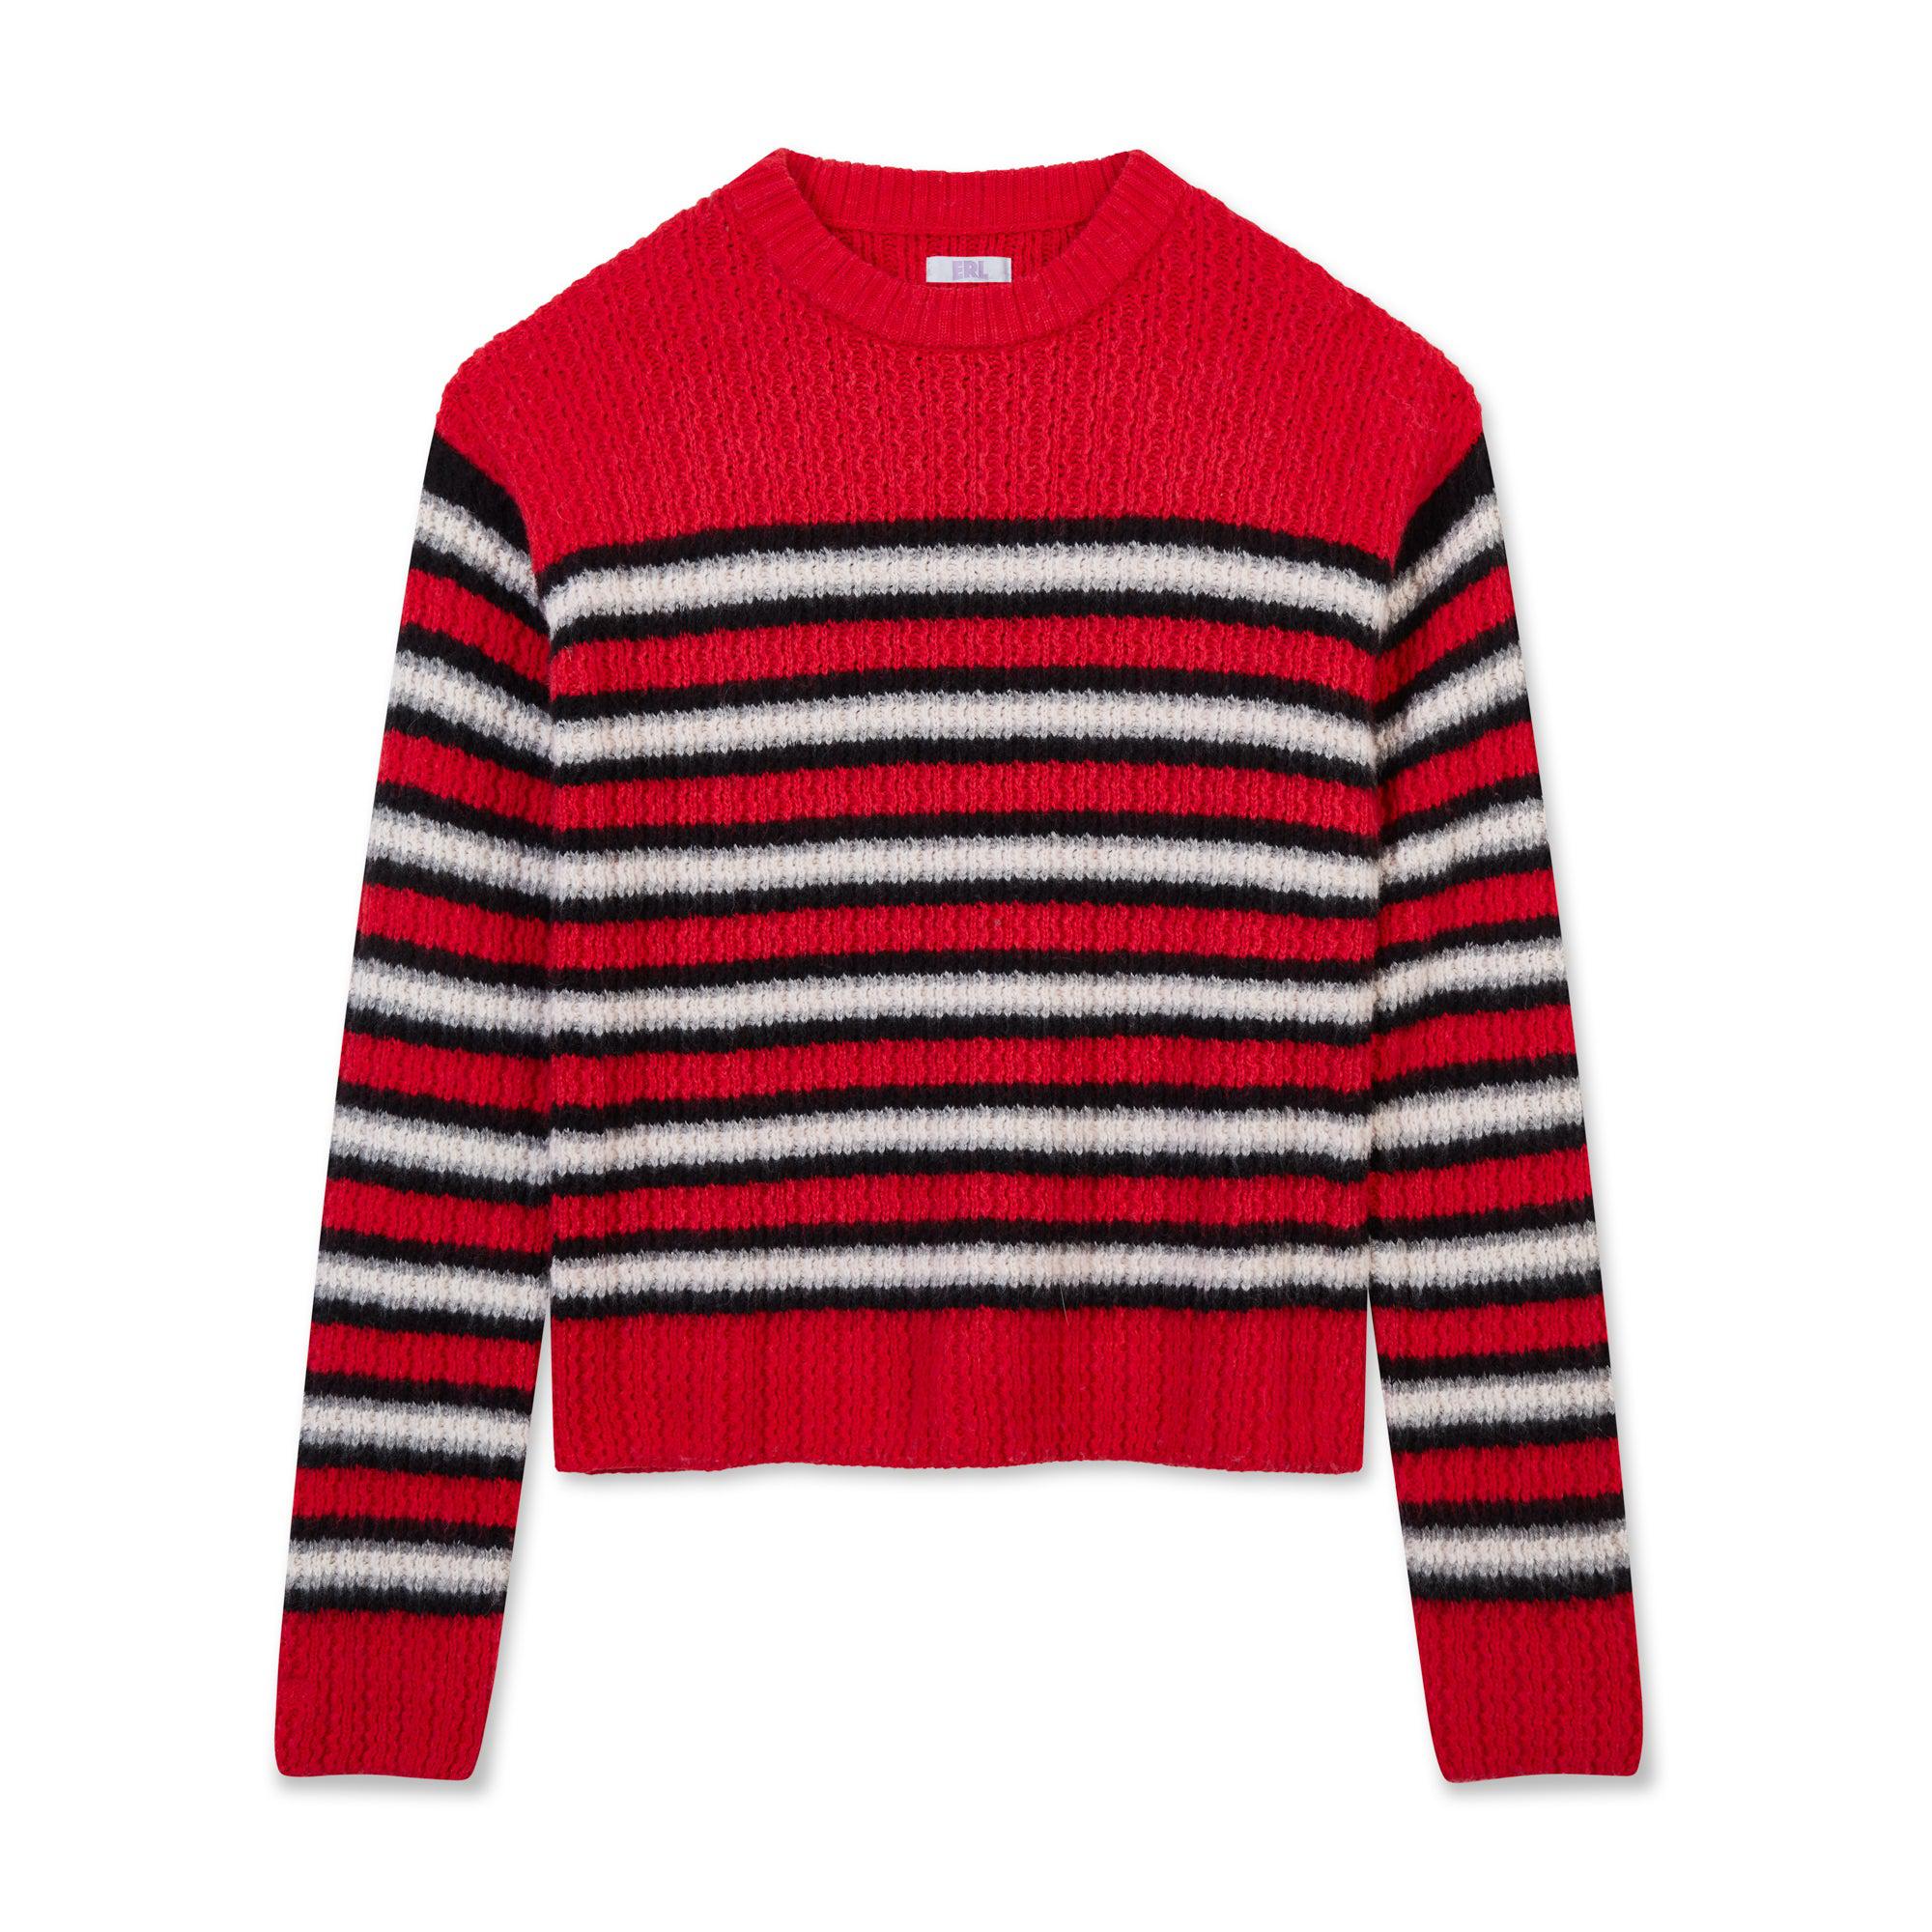 ERL Stripes Crew Neck Sweater (Red) by ERL